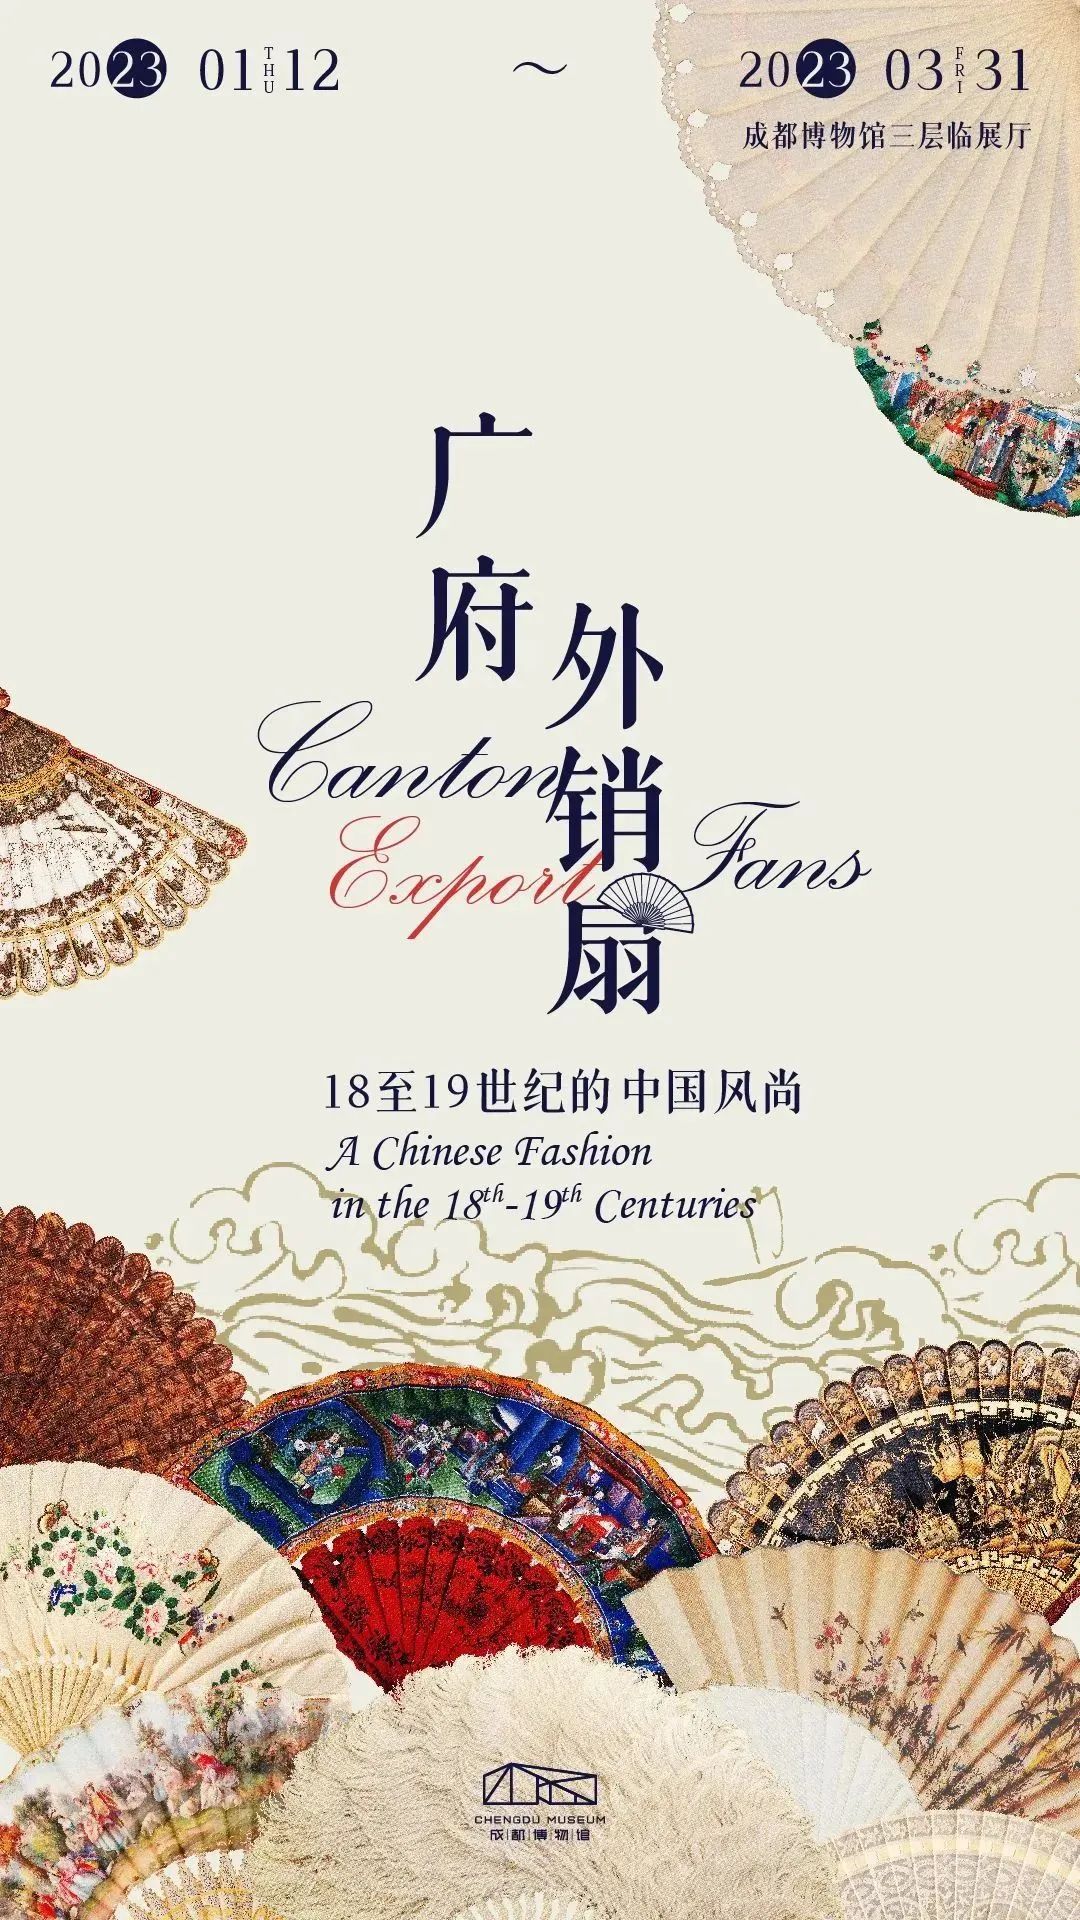 Exhibition on Canton Export Fans